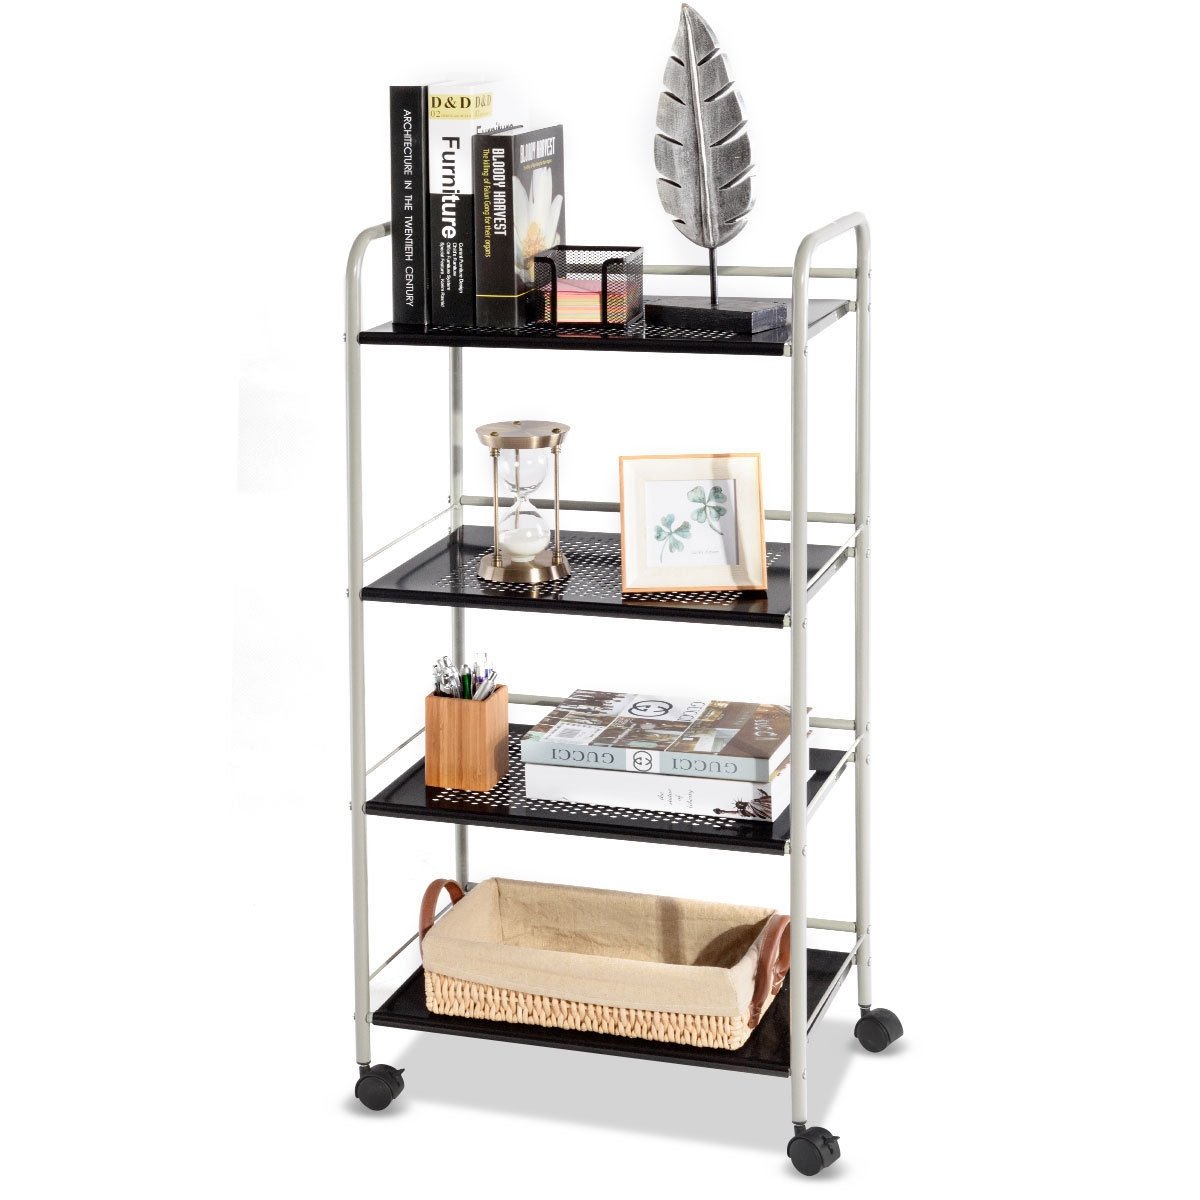 4 Tiers Rolling Cart Storage Display Rack-19.5 Inch - Gallery Canada